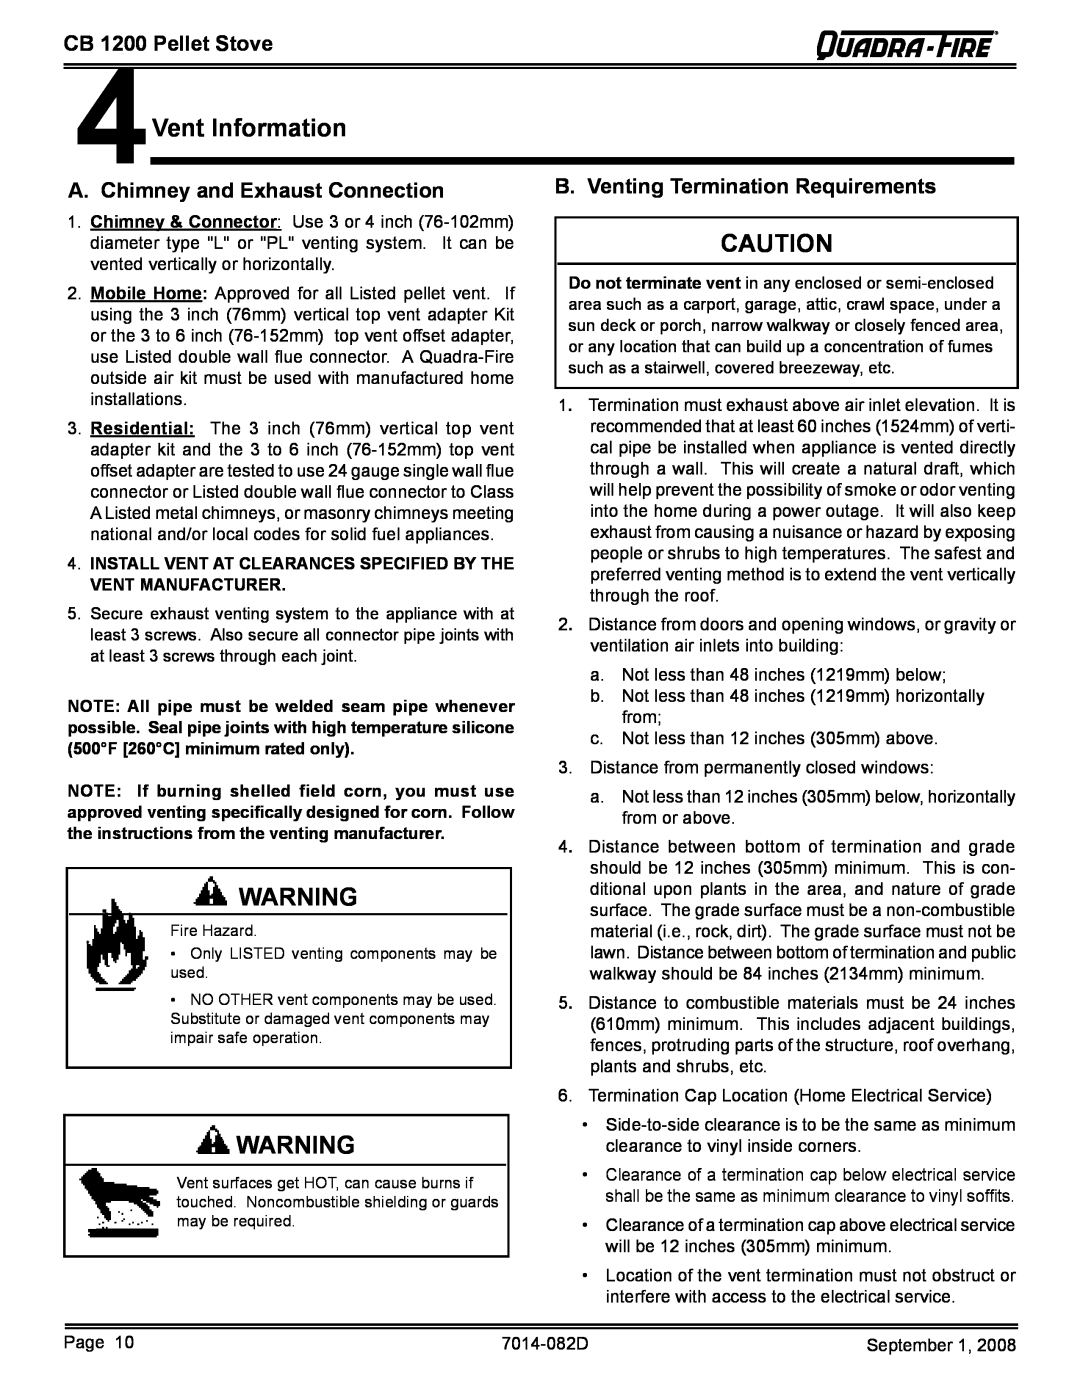 Quadra-Fire CB1200-B owner manual Vent Information, Chimney and Exhaust Connection, B. Venting Termination Requirements 